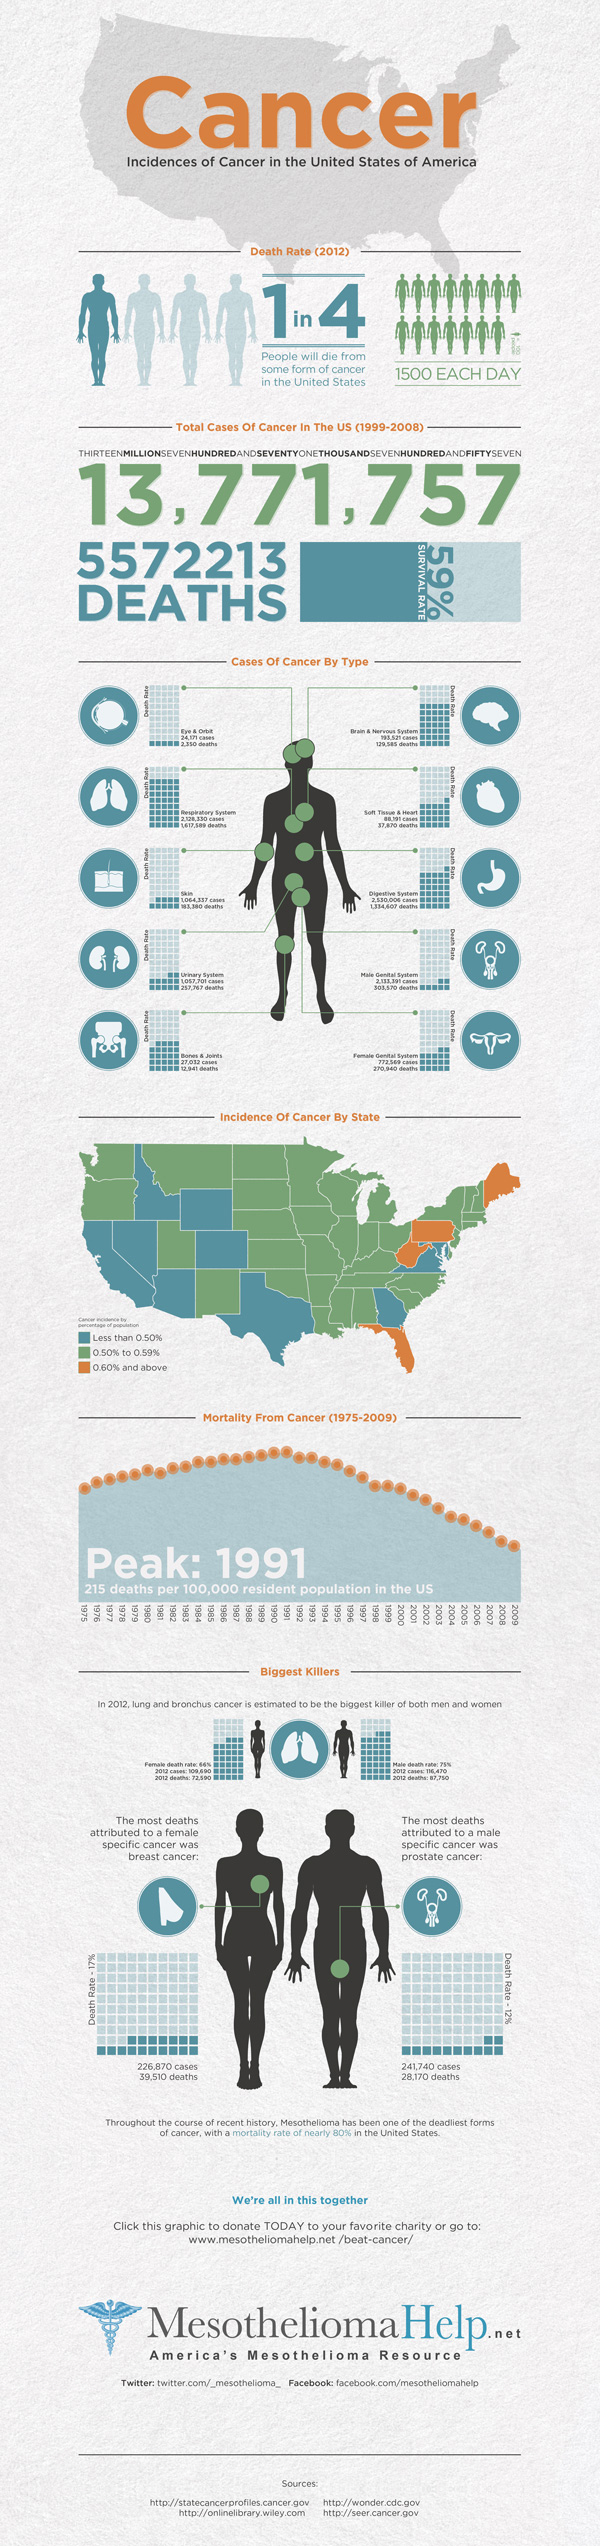 Cancer in the USA infographic